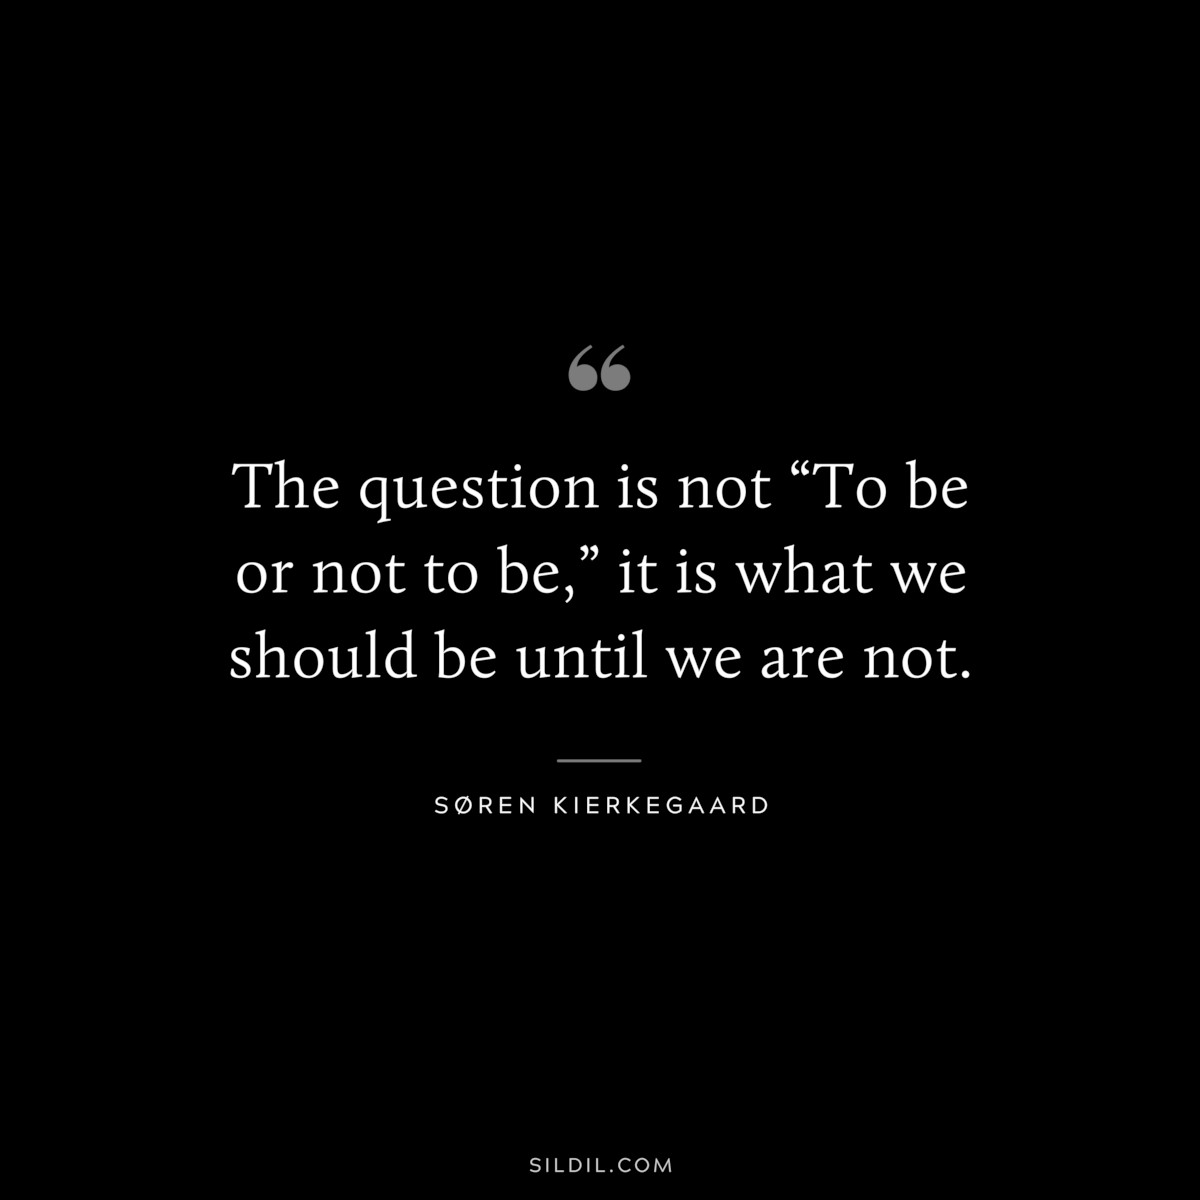 The question is not “To be or not to be,” it is what we should be until we are not. ― Søren Kierkegaard